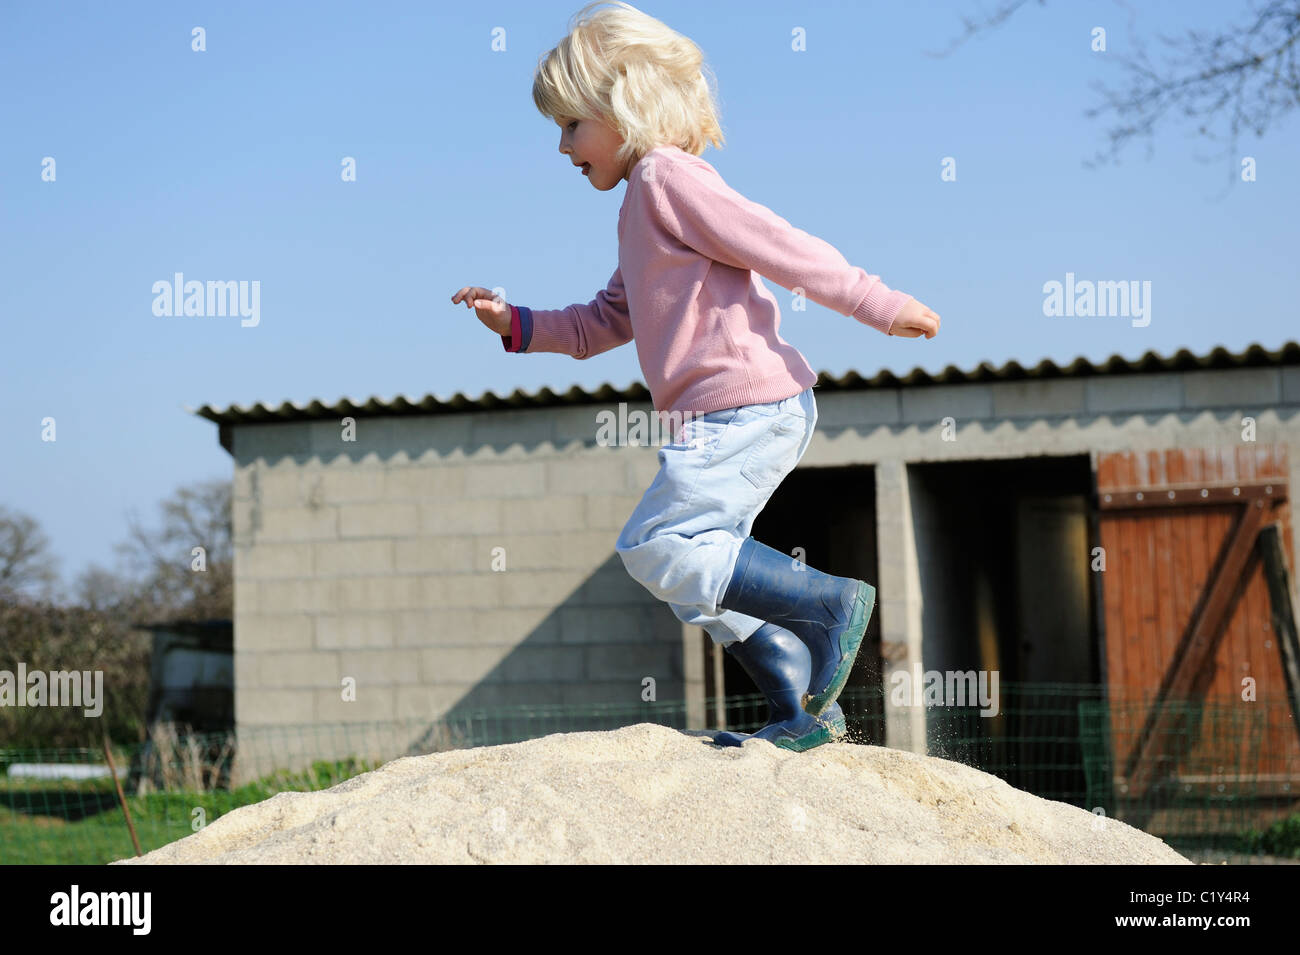 Stock Photo of a Five Year old Girl Running Across a Pile of Sand. Stock Photo